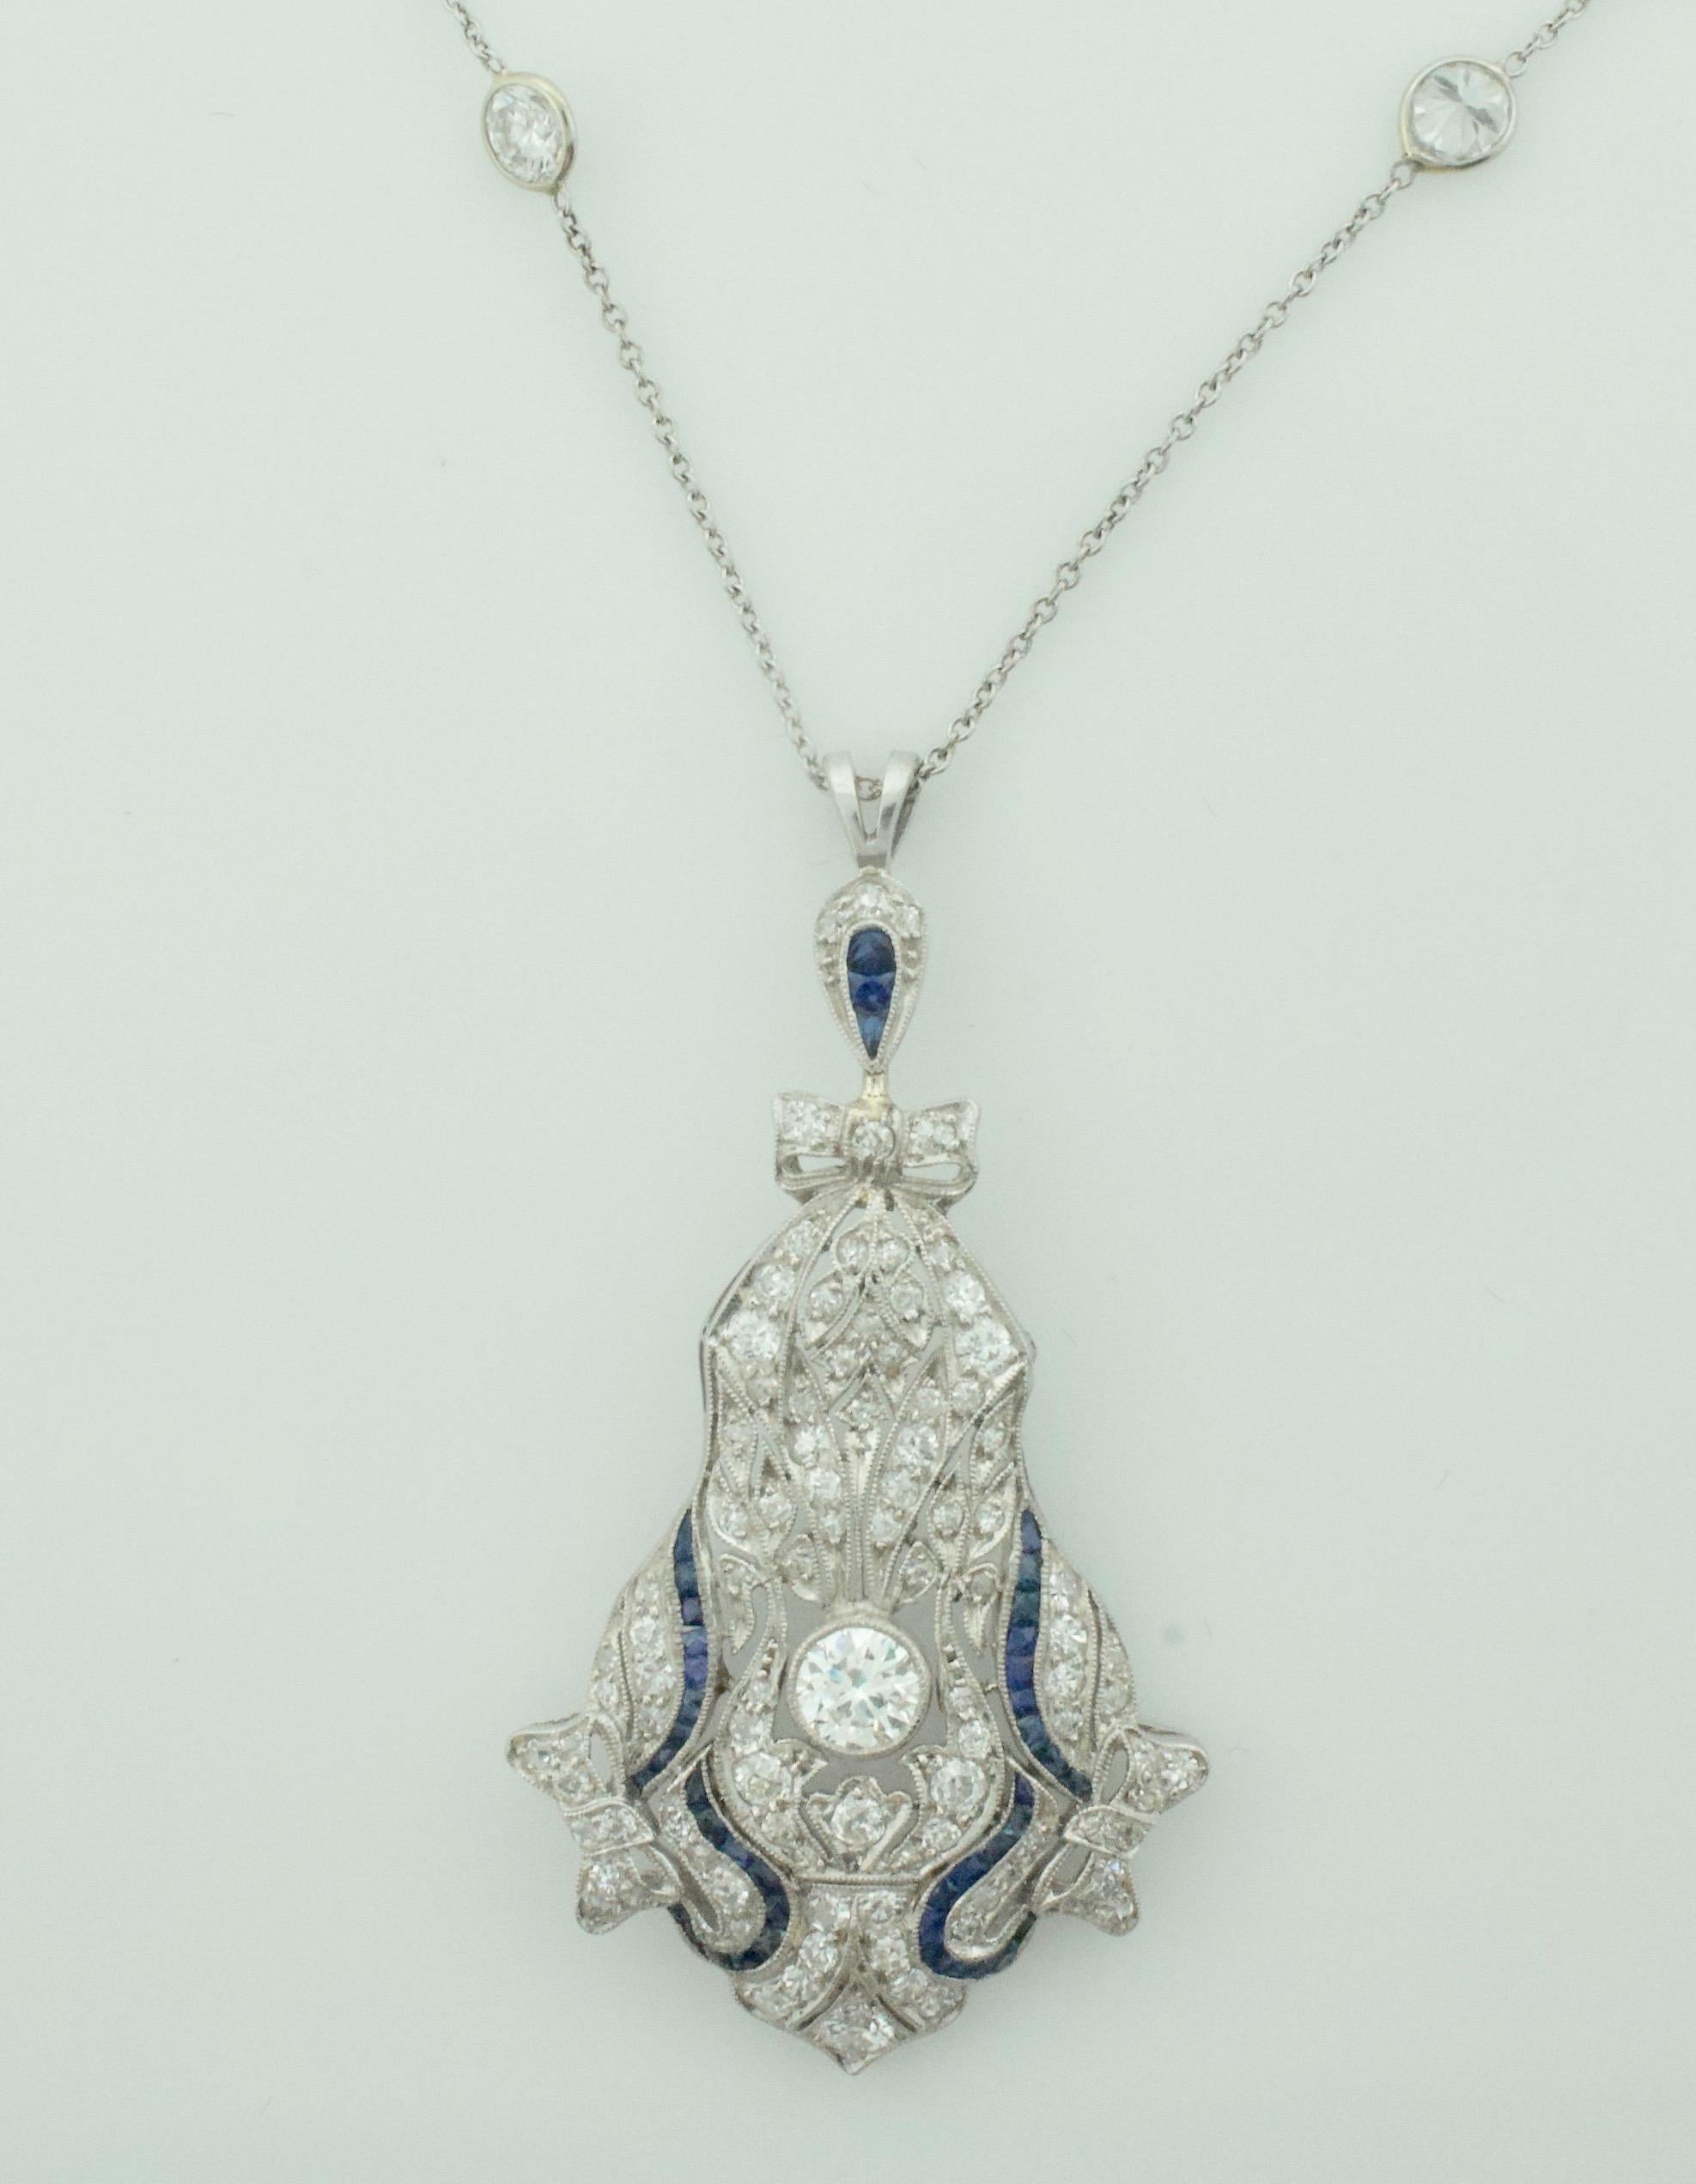 French Cut Extreme Art Deco Diamond and Sapphire Necklace in Platinum, circa 1930s